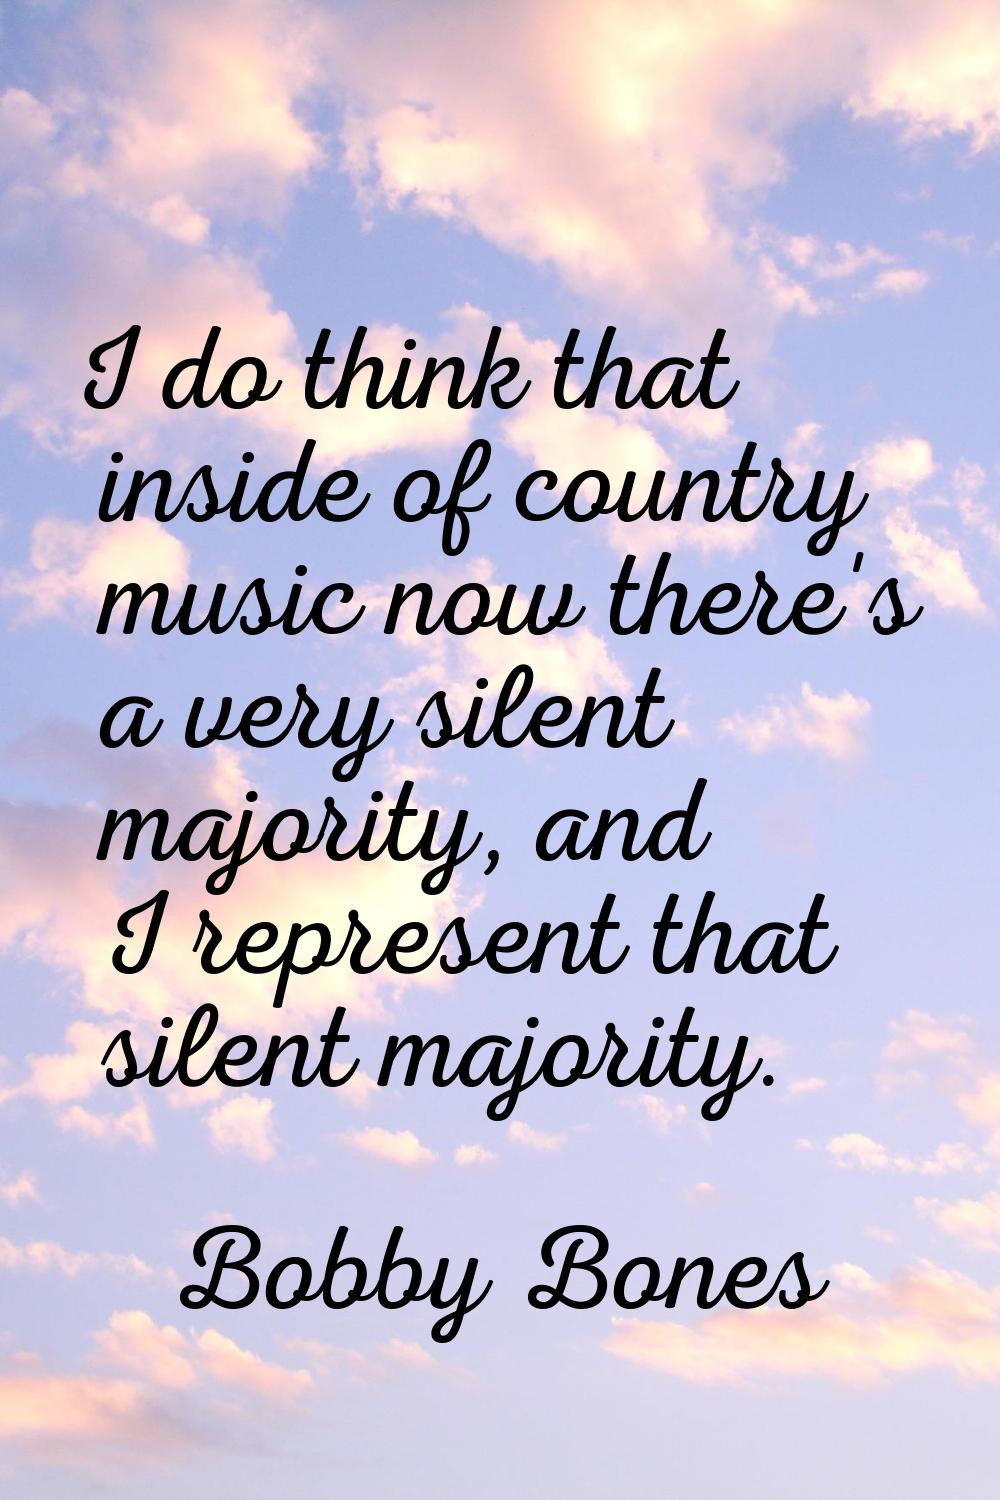 I do think that inside of country music now there's a very silent majority, and I represent that si